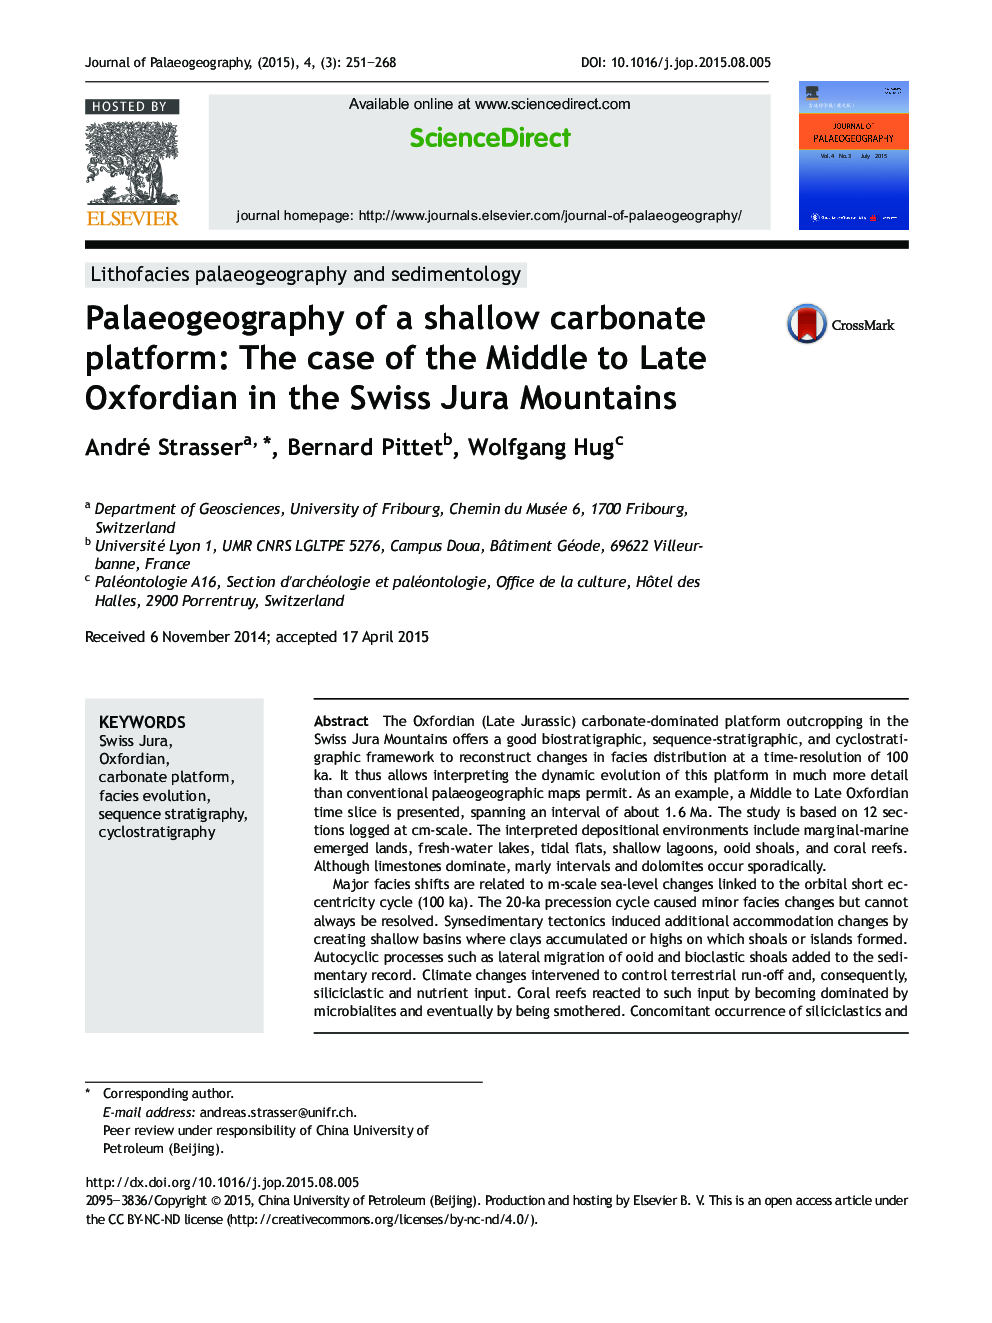 Palaeogeography of a shallow carbonate platform: The case of the Middle to Late Oxfordian in the Swiss Jura Mountains 